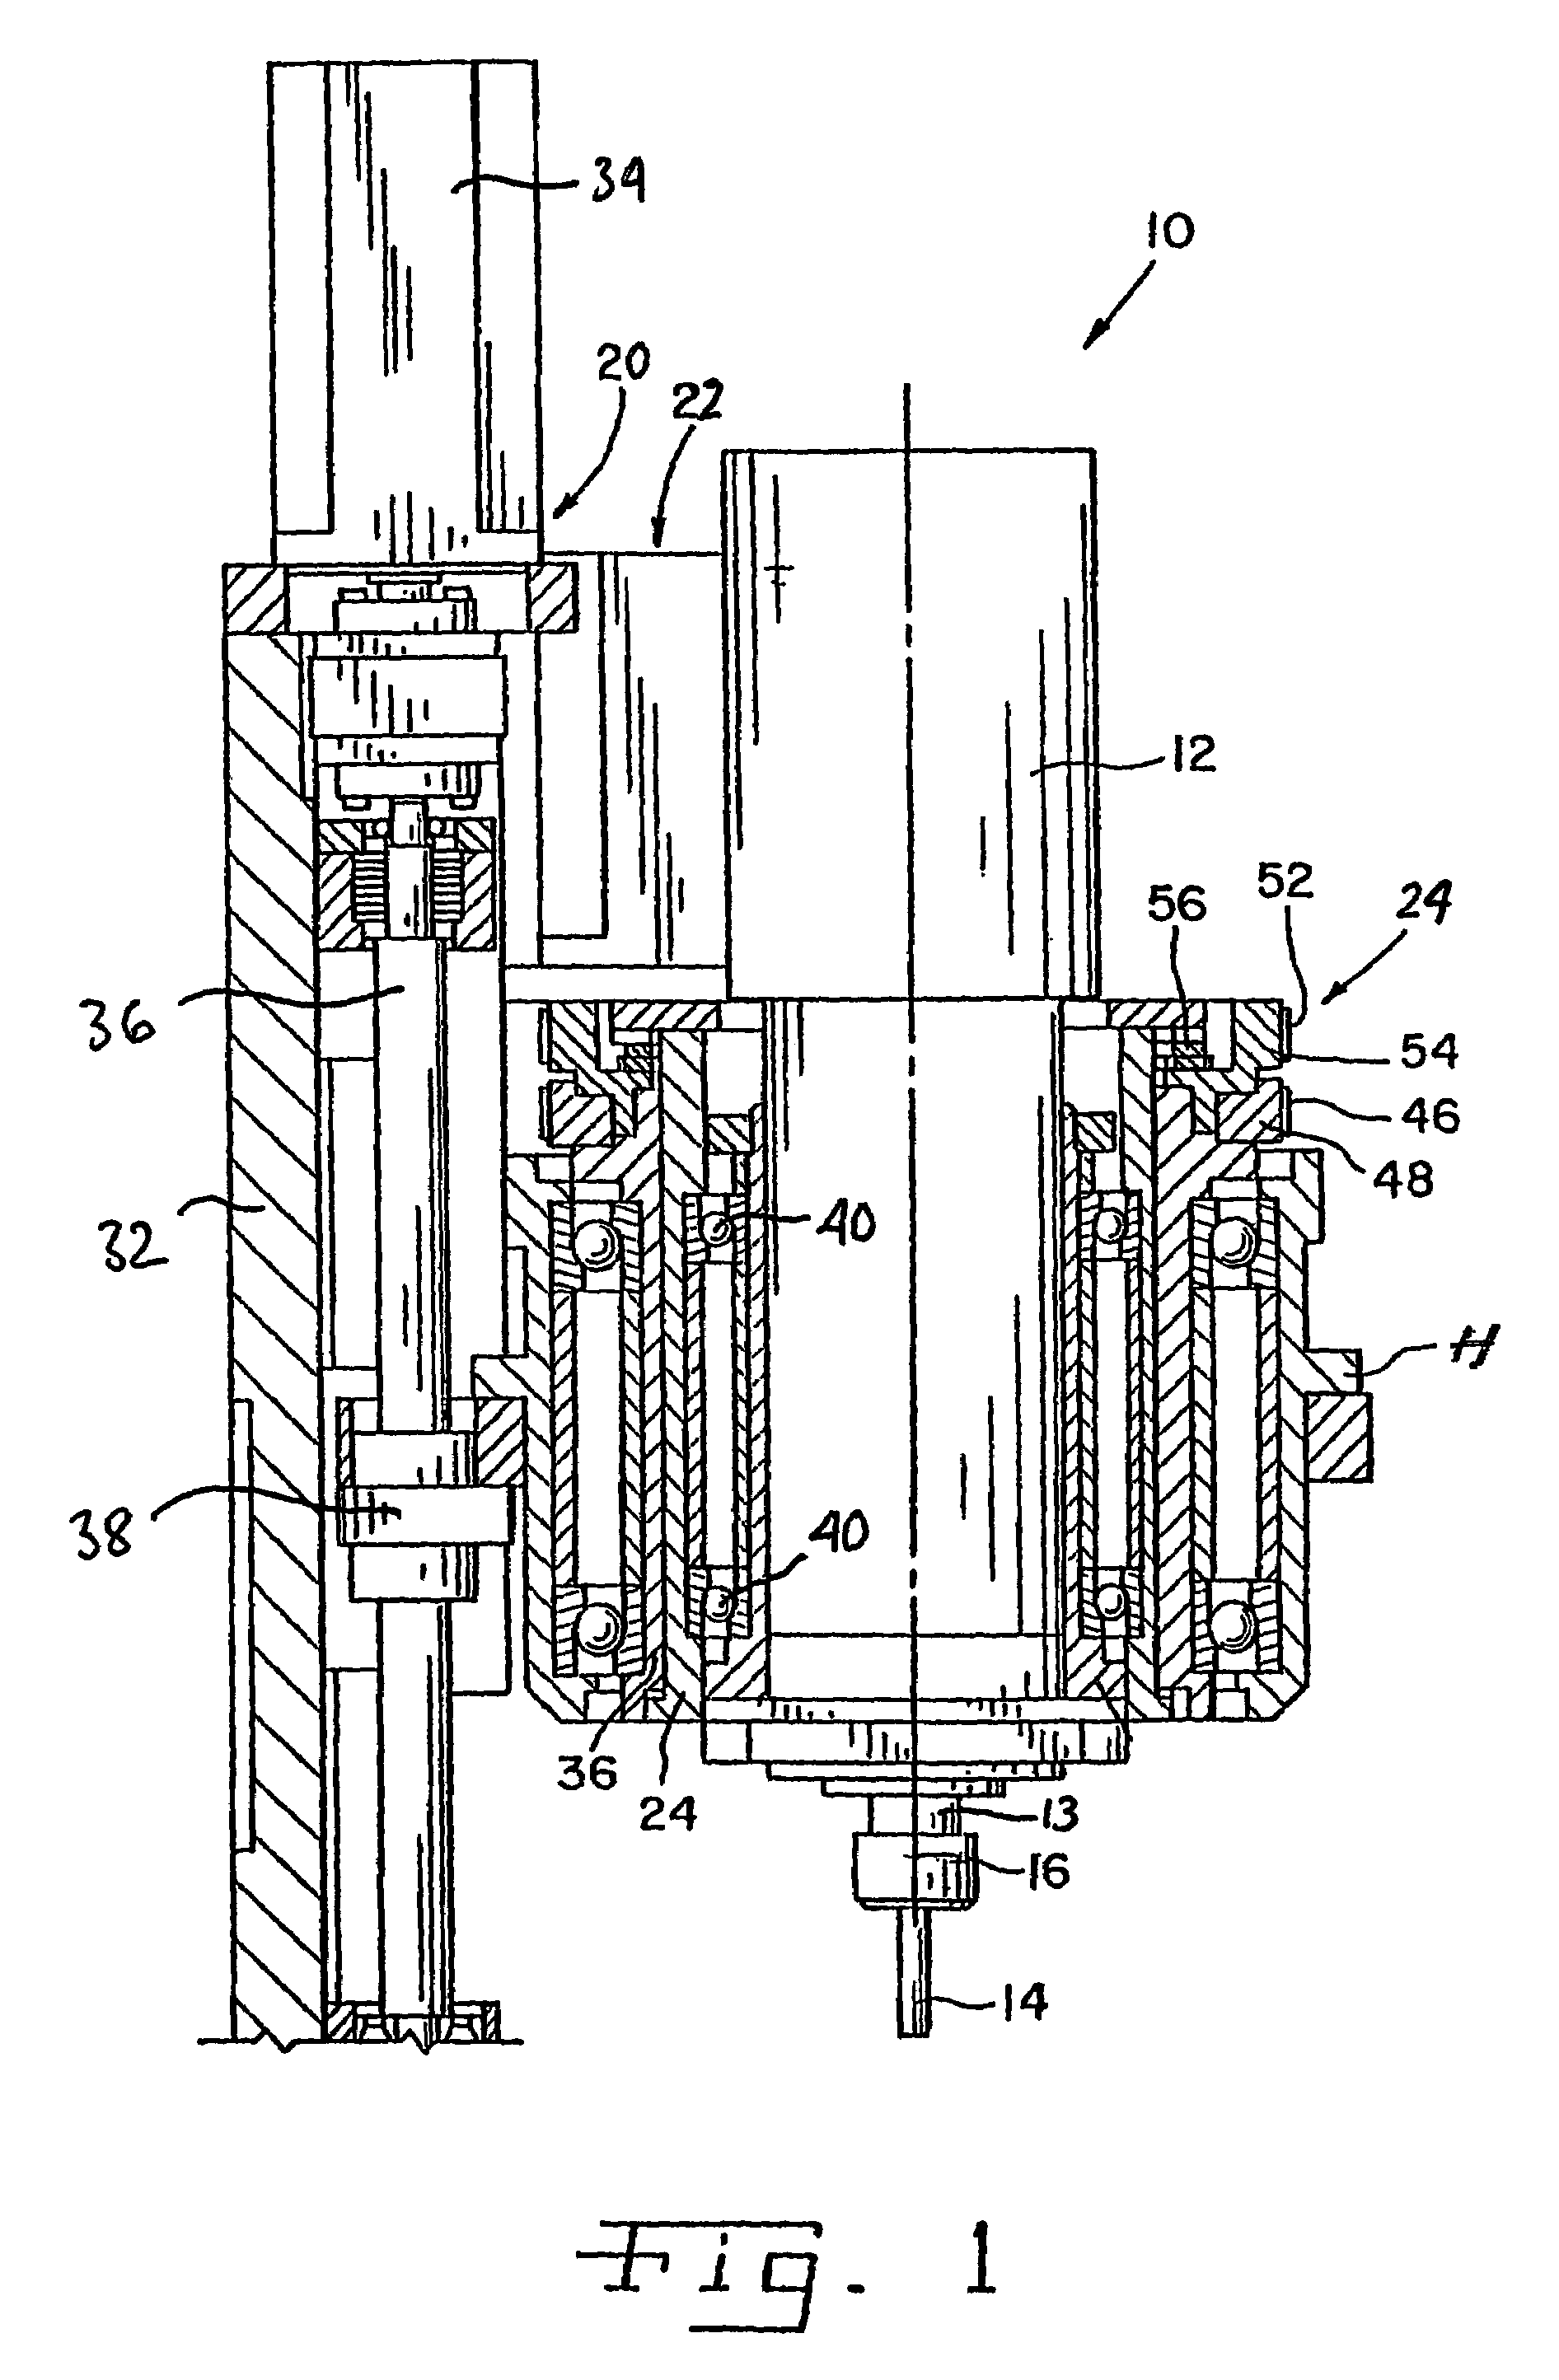 Method and apparatus for measuring a depth of holes in composite-material workpieces being machined by an orbiting cutting tool